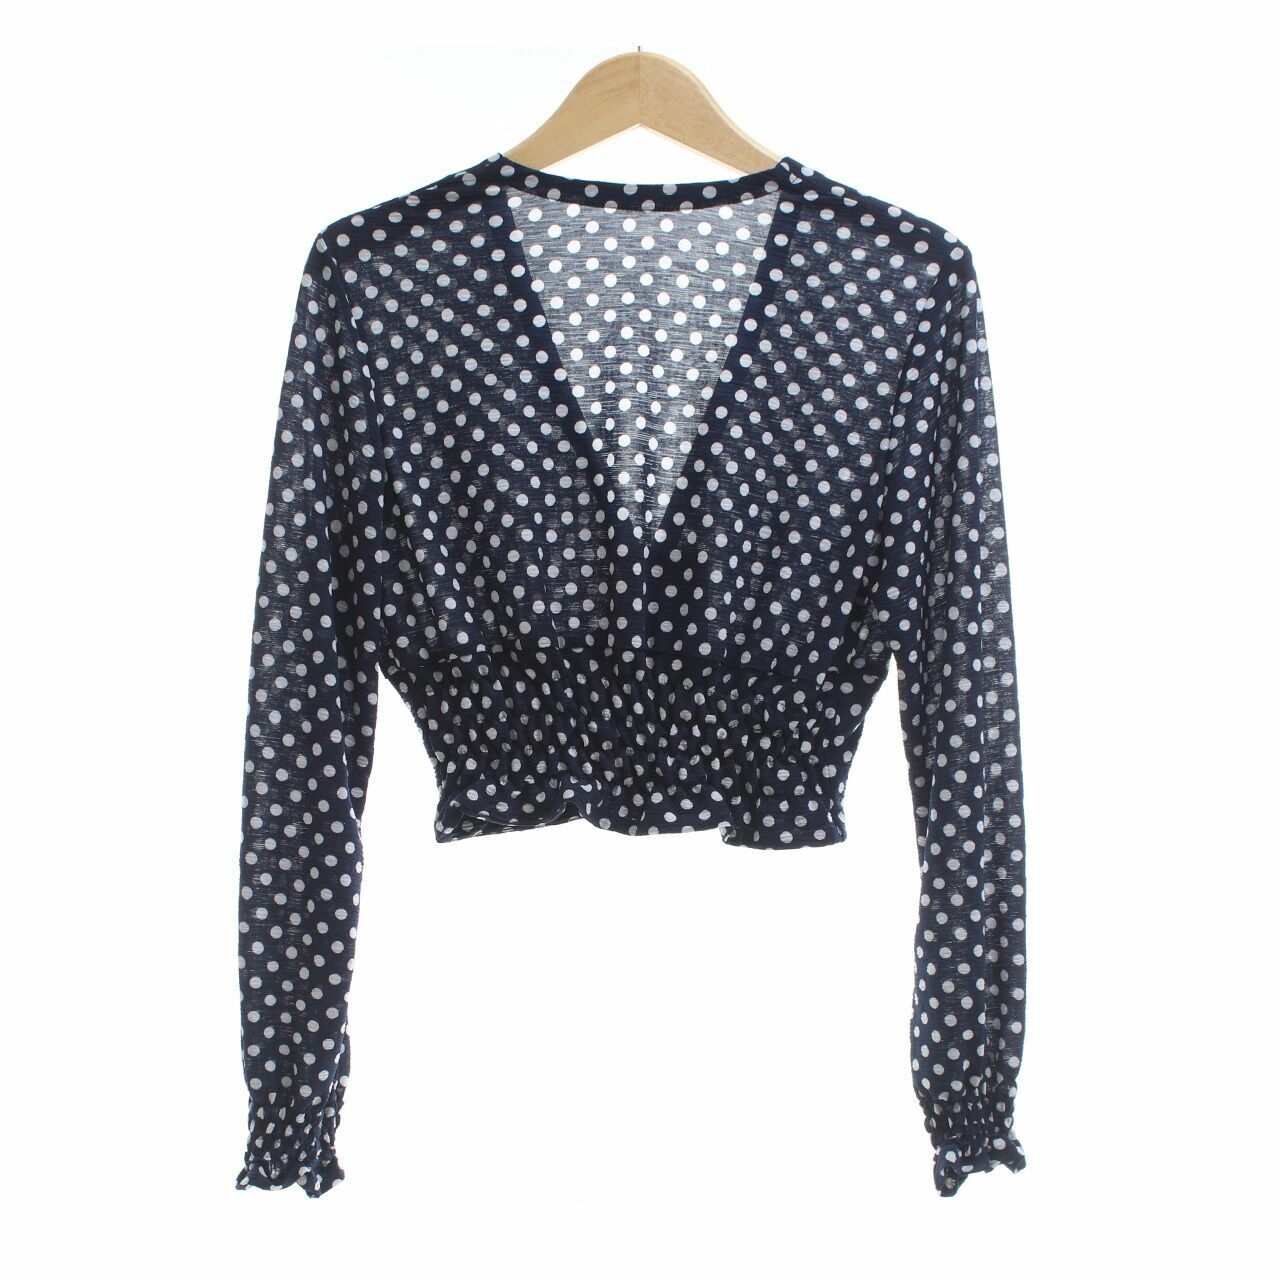 With Love Blue Polkadots Blouse